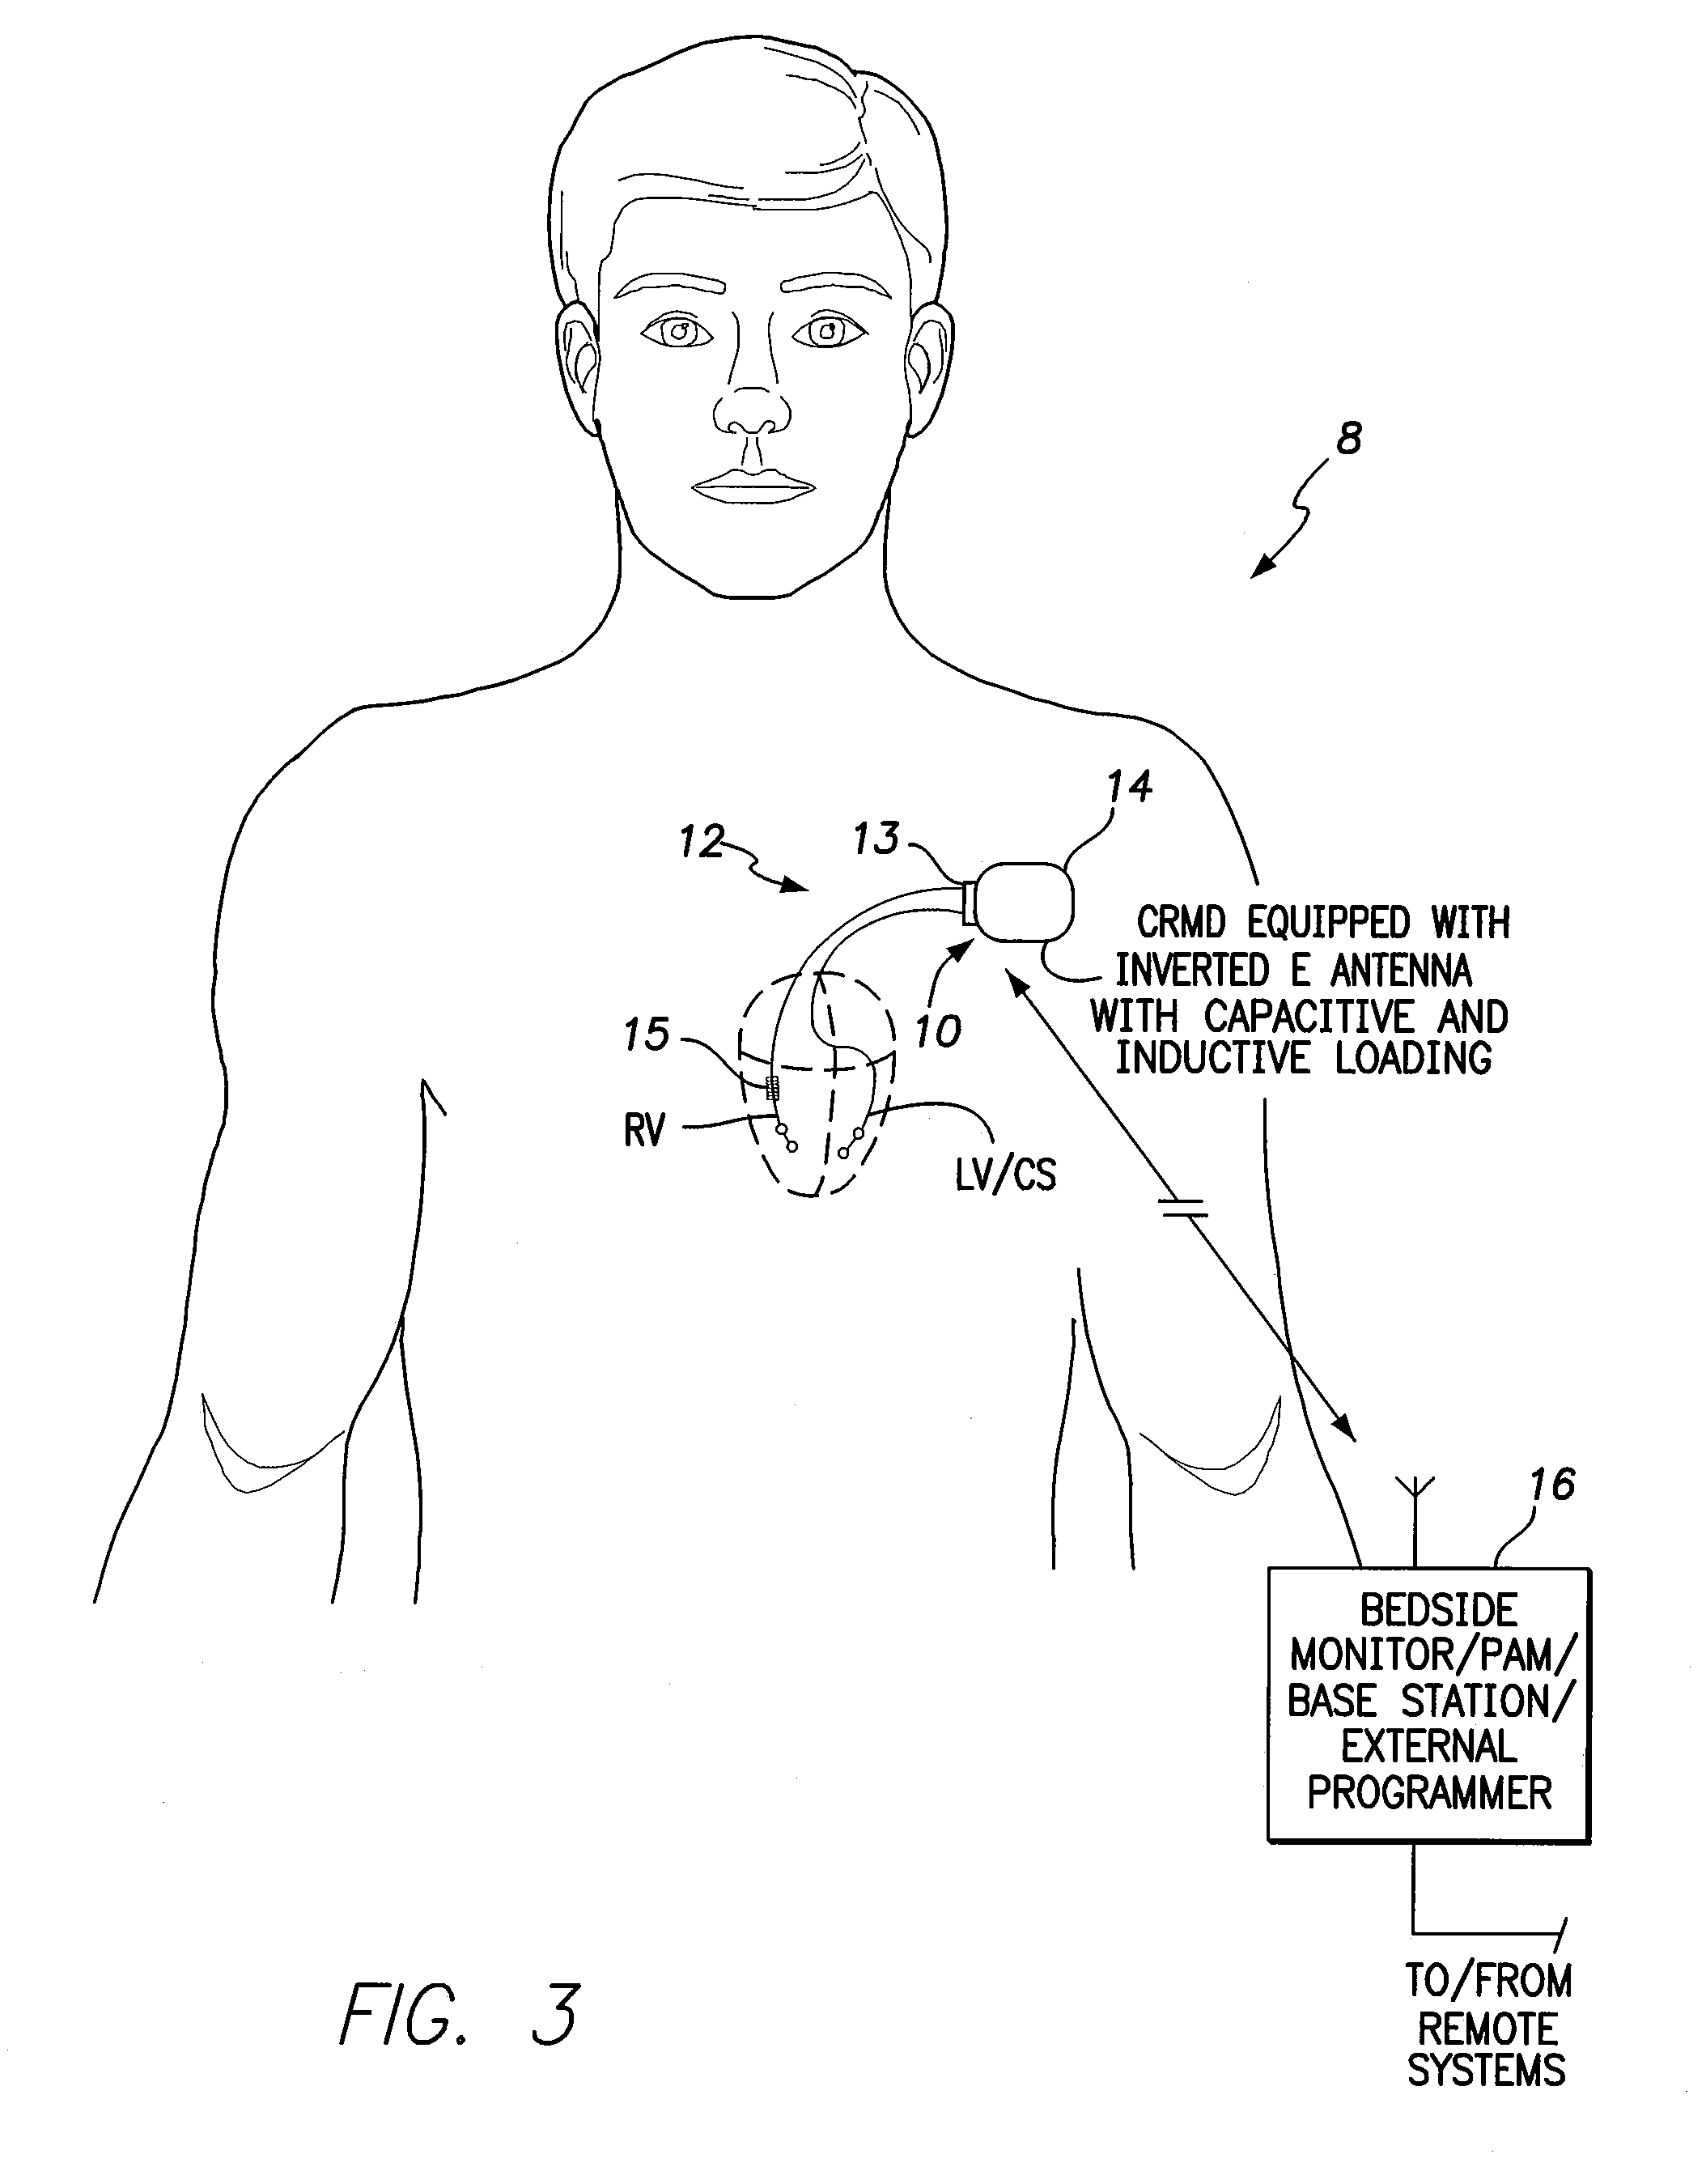 Inverted e antenna with parallel plate capacitor formed along an arm of the antenna for use with an implantable medical device